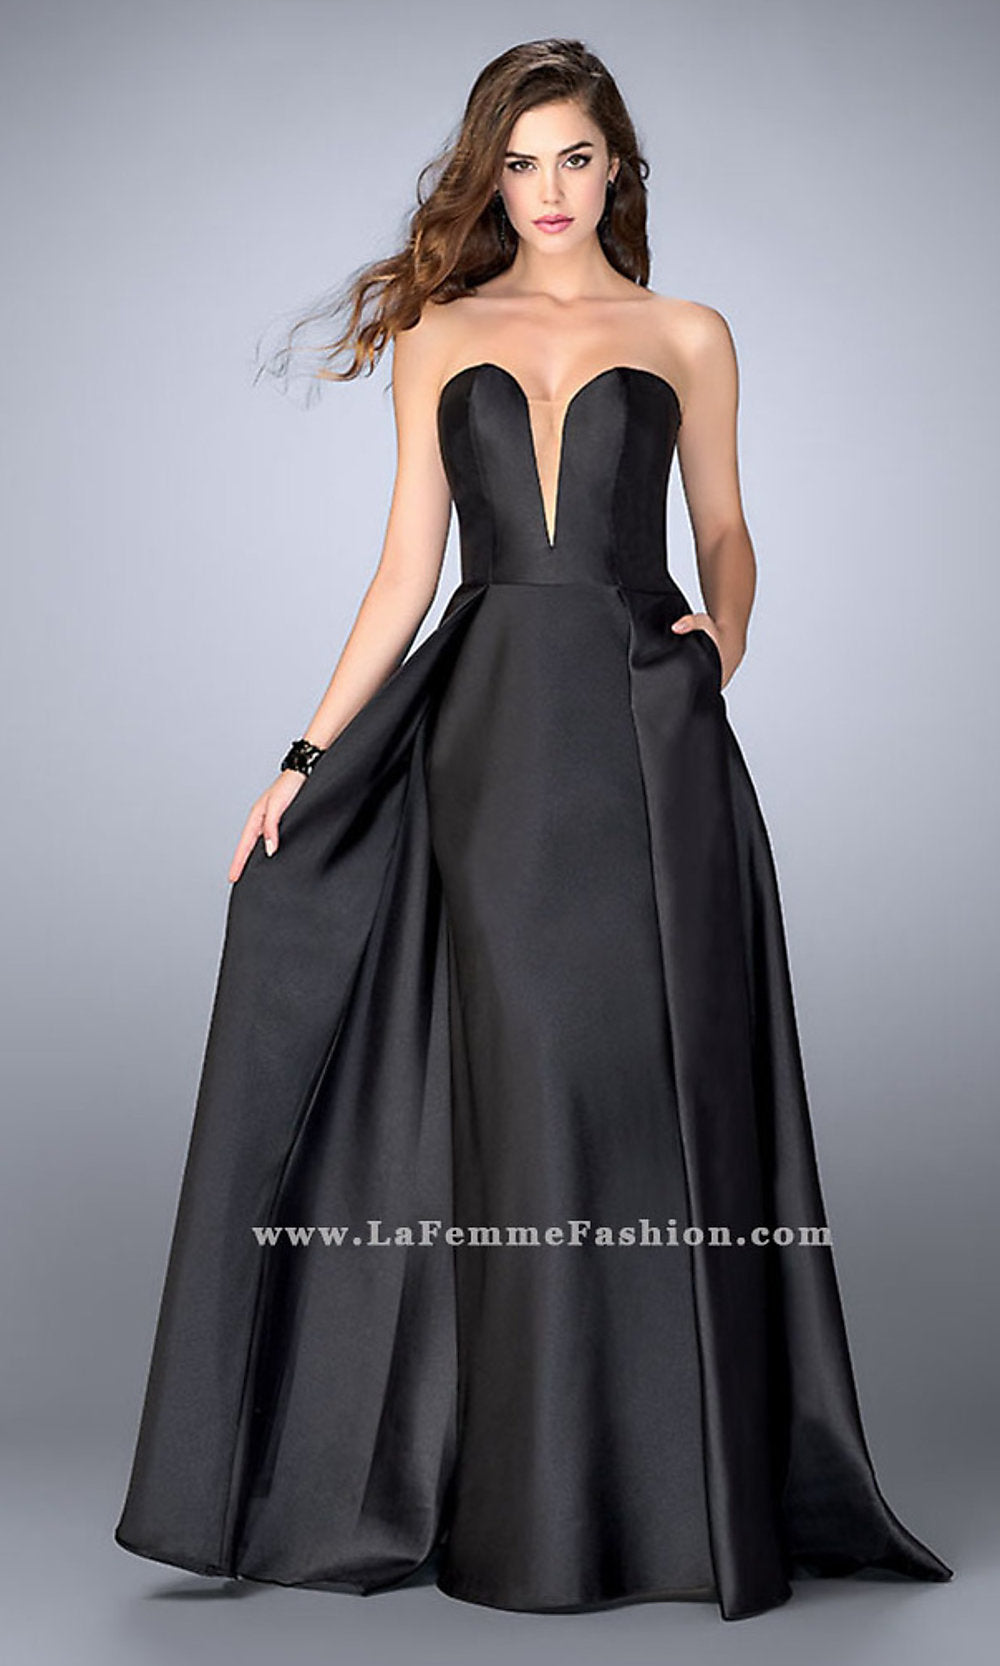 Black Strapless Prom Dress with Pockets